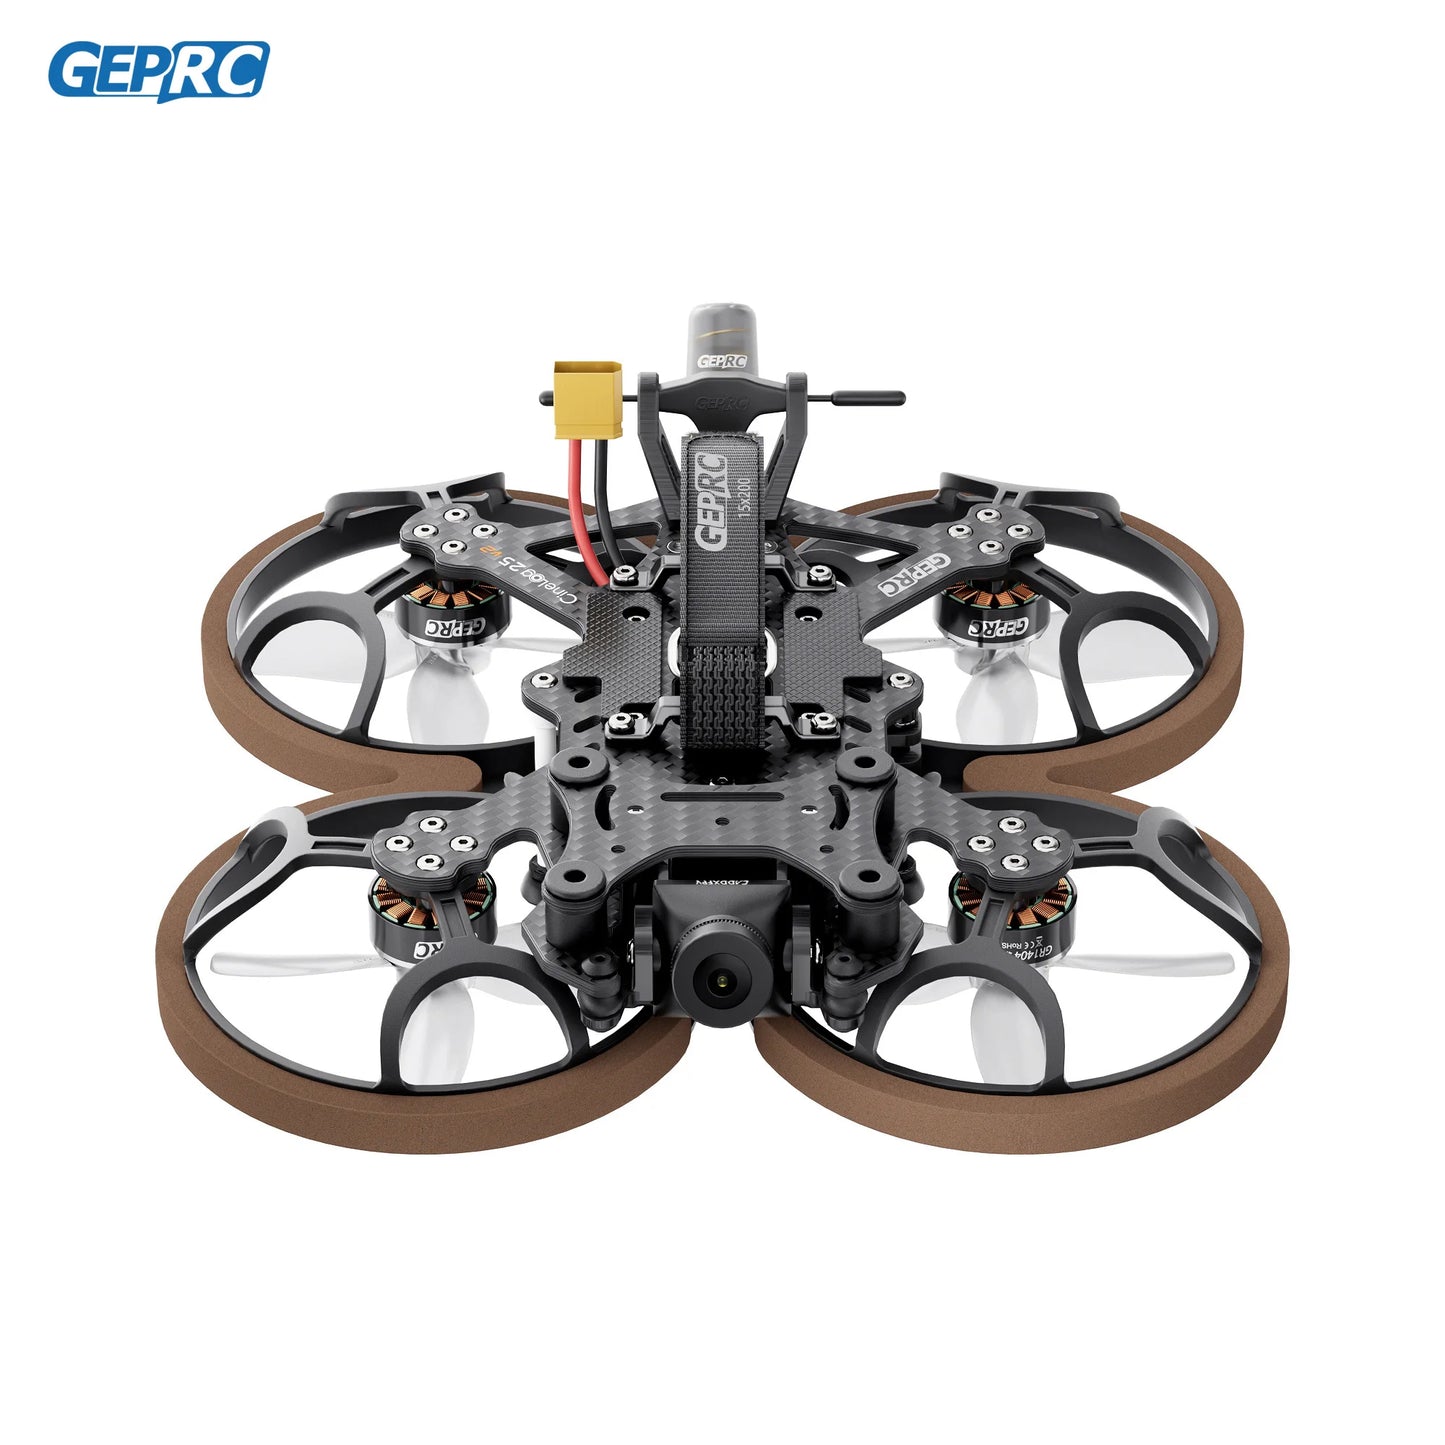 GEPRC Cinelog25 V2 Analog - FPV TAKER G4 35A AIO Caddx Ratel2 Video BNF Mini 4S Freestyle RC Quadcopter Drone Racing Kit 148g